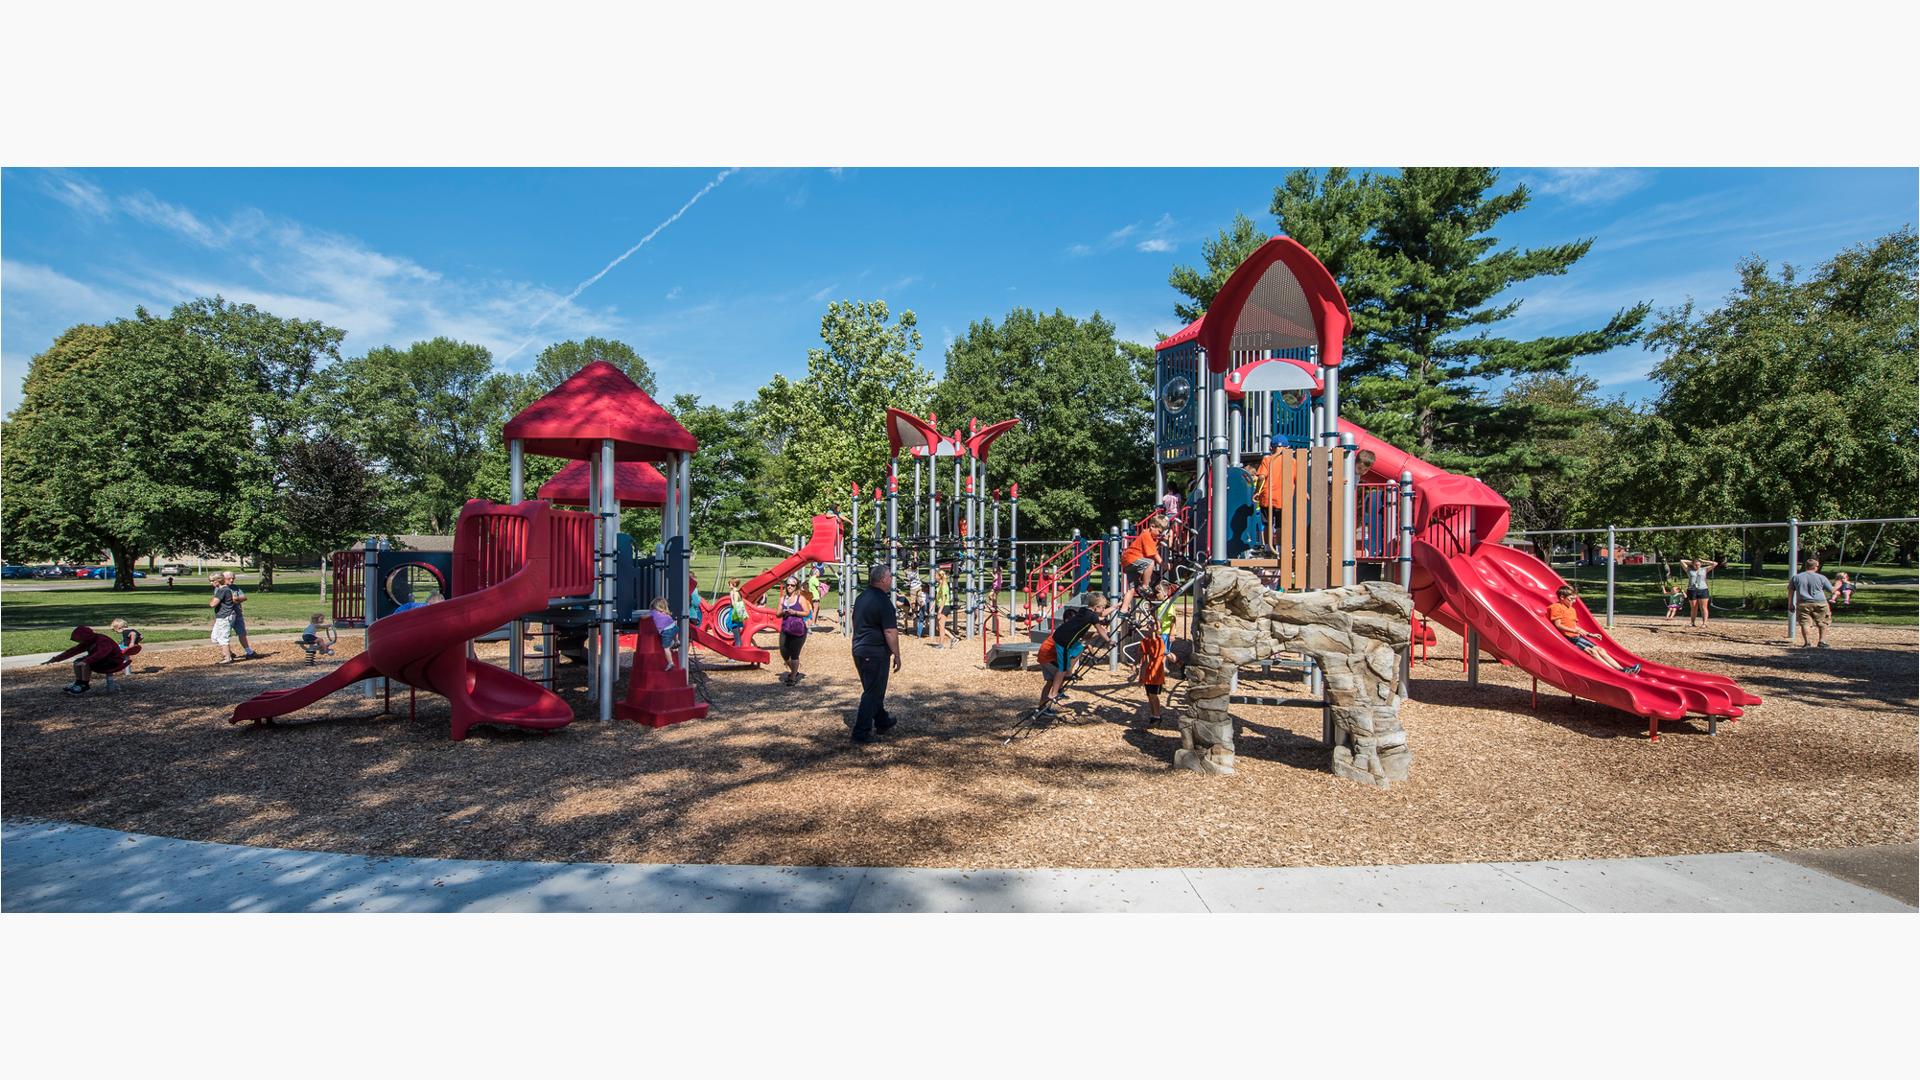 Kids can climb, swing, twirl and slide on a PlayBooster® play structure while an adult in black watches. The Geo Netplex in the background is covered with children at the base.